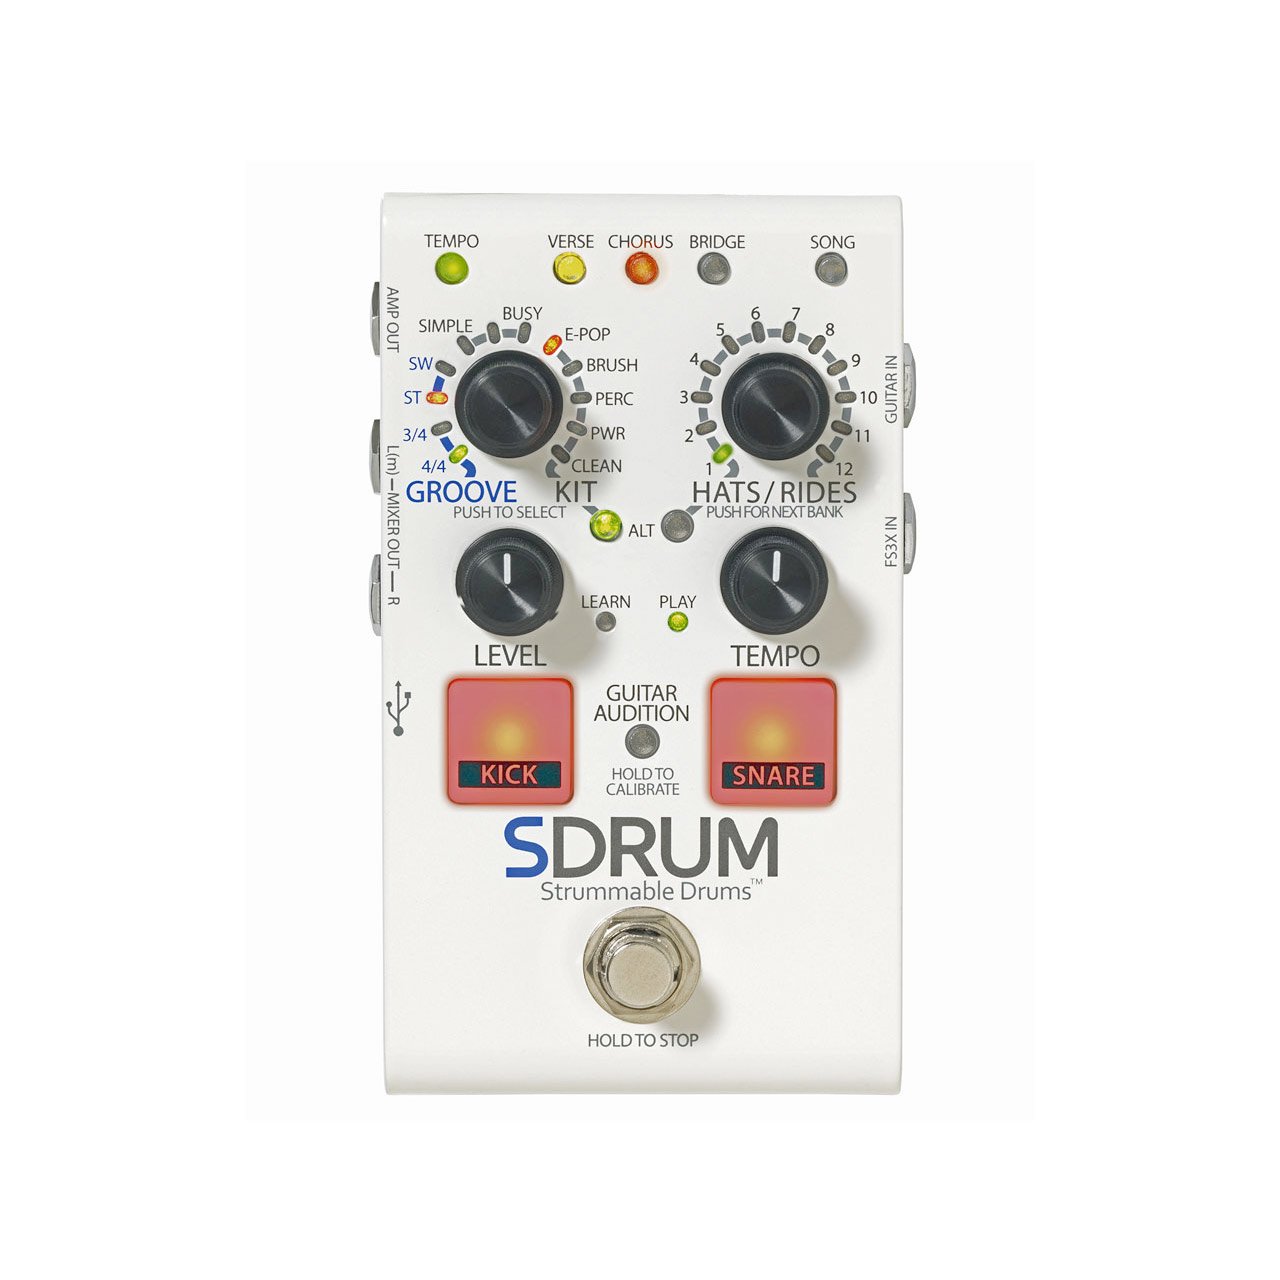 Pedals & Effects - DigiTech SDRUM Strummable Drums - Drum Machine For Guitarists & Bassists